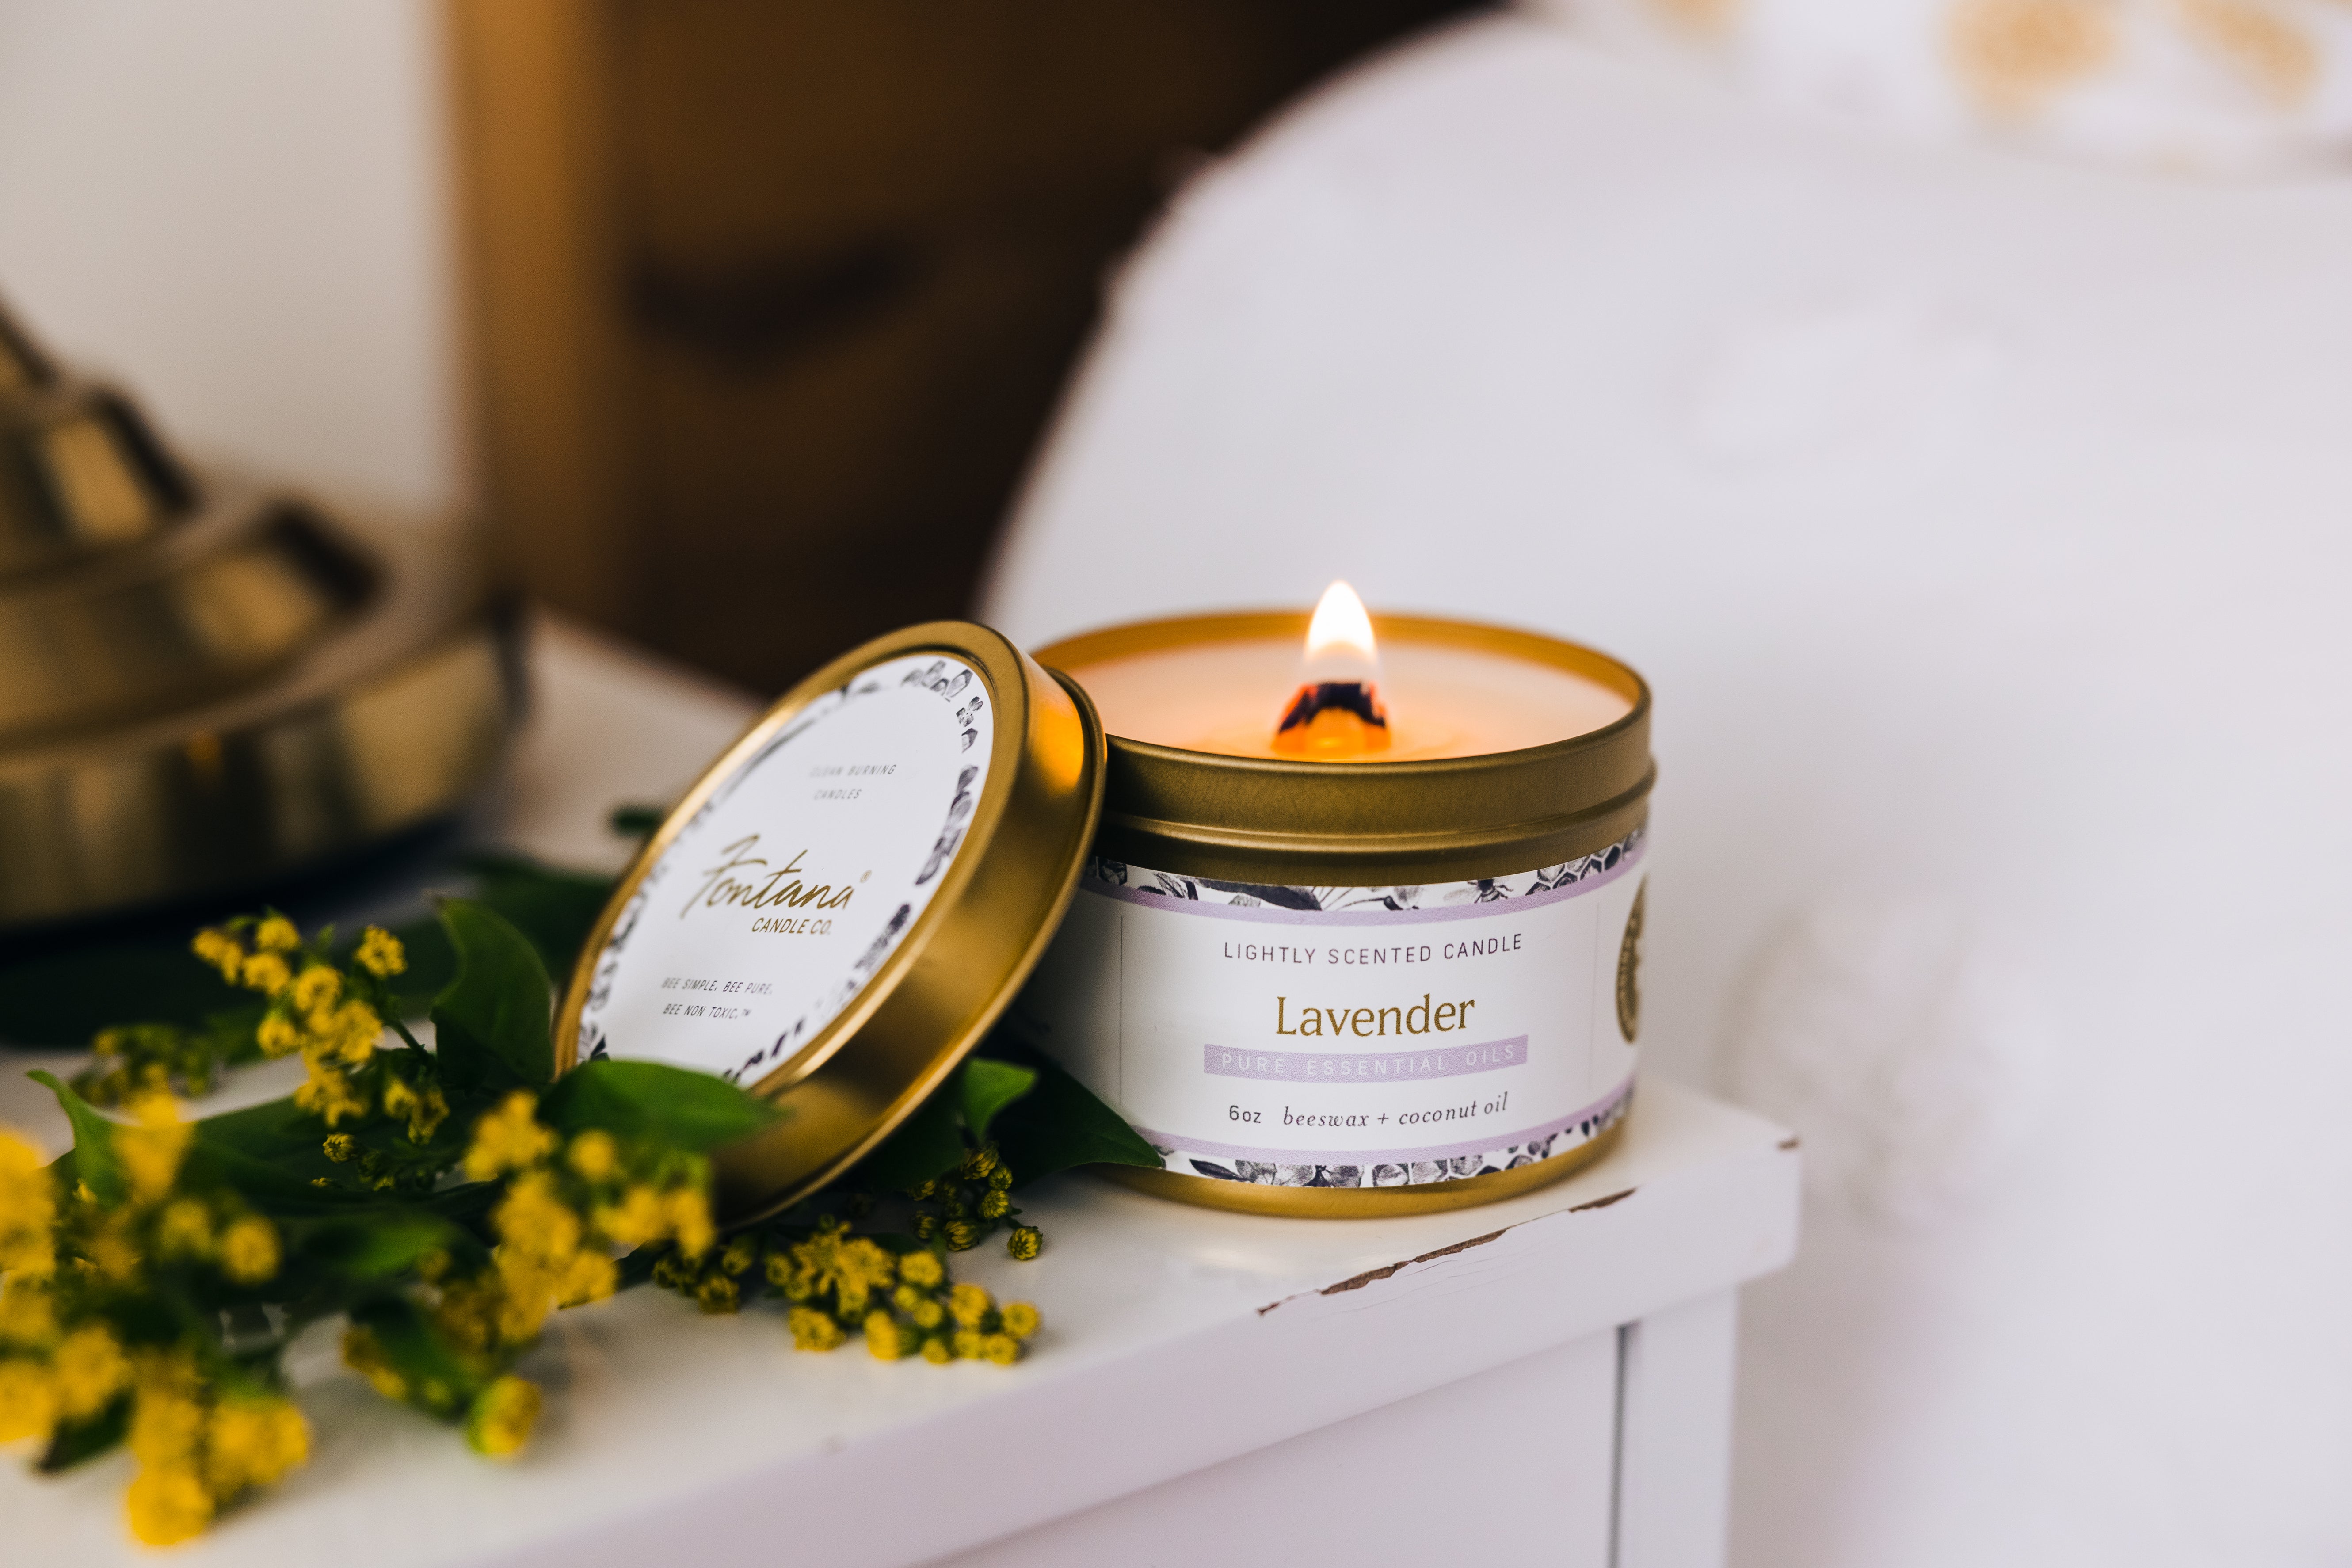 All Non-Toxic Candles